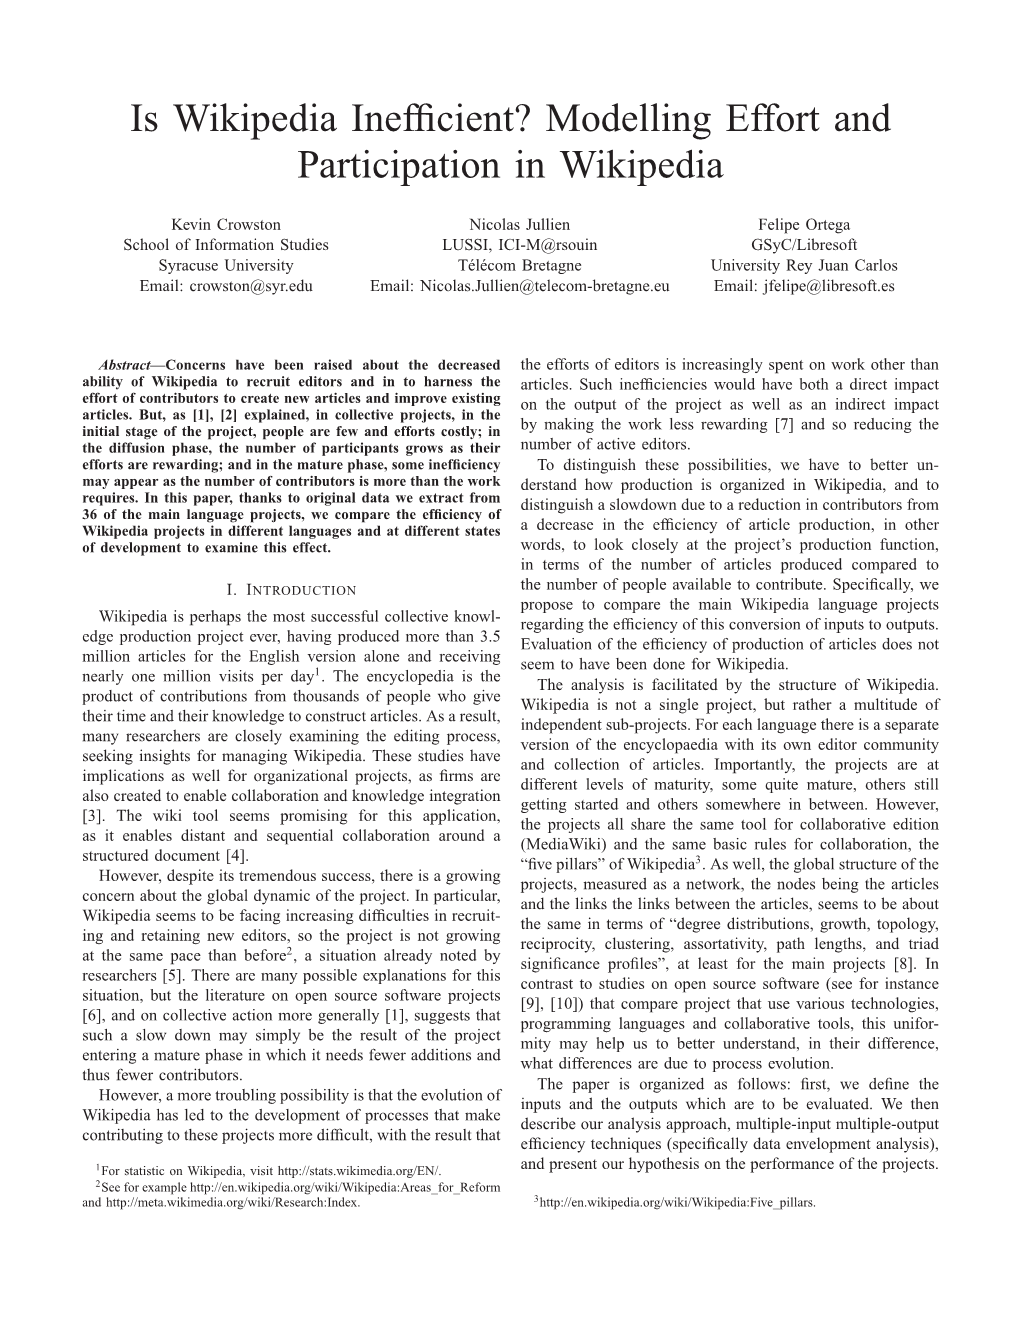 Is Wikipedia Inefficient? Modelling Effort and Participation in Wikipedia